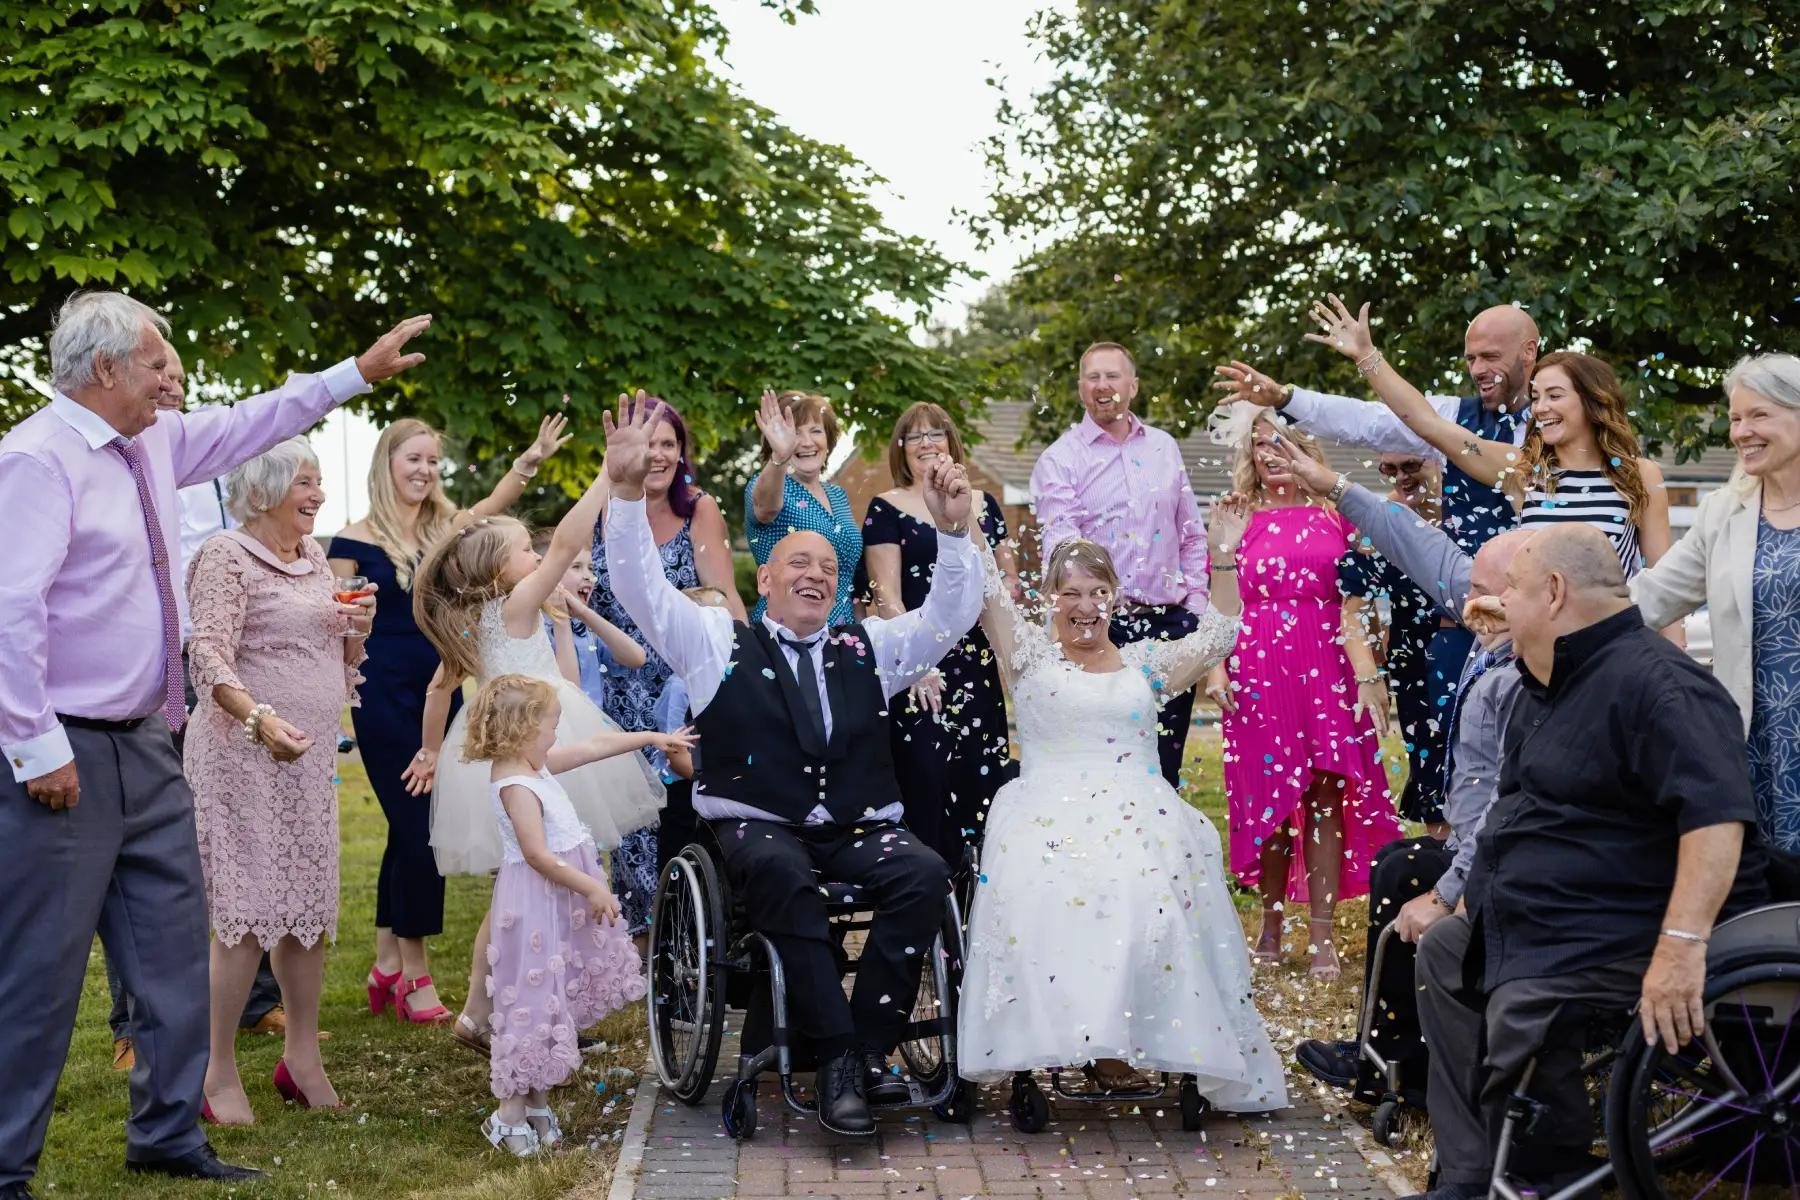 Friends and family throw confetti on a bridal couple seated in their wheelchairs